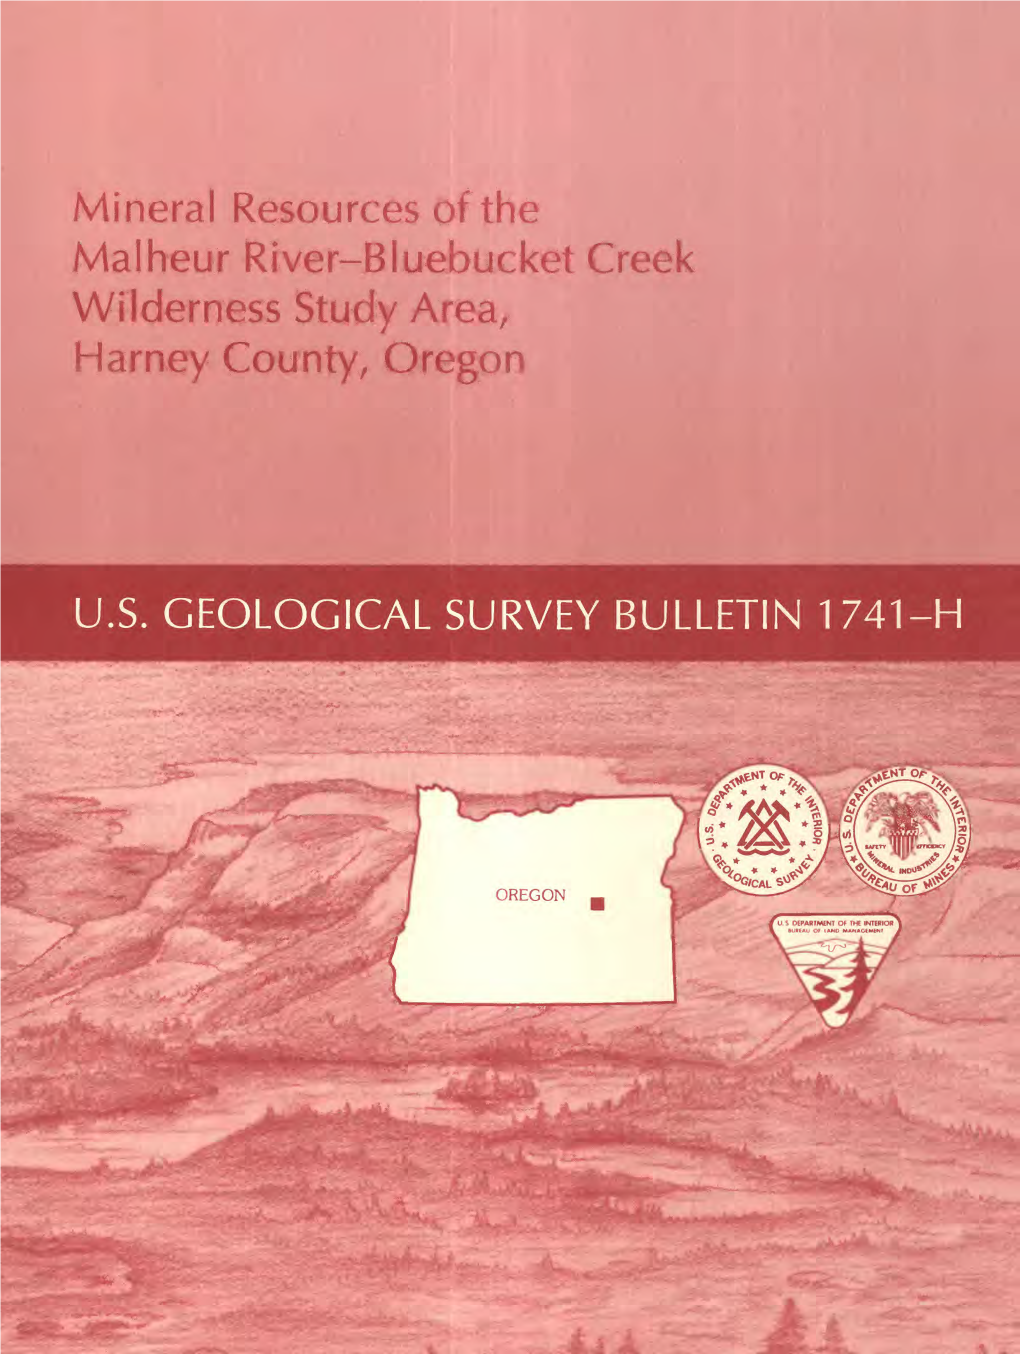 Mineral Resources of the Malheur River-Bluebucket N